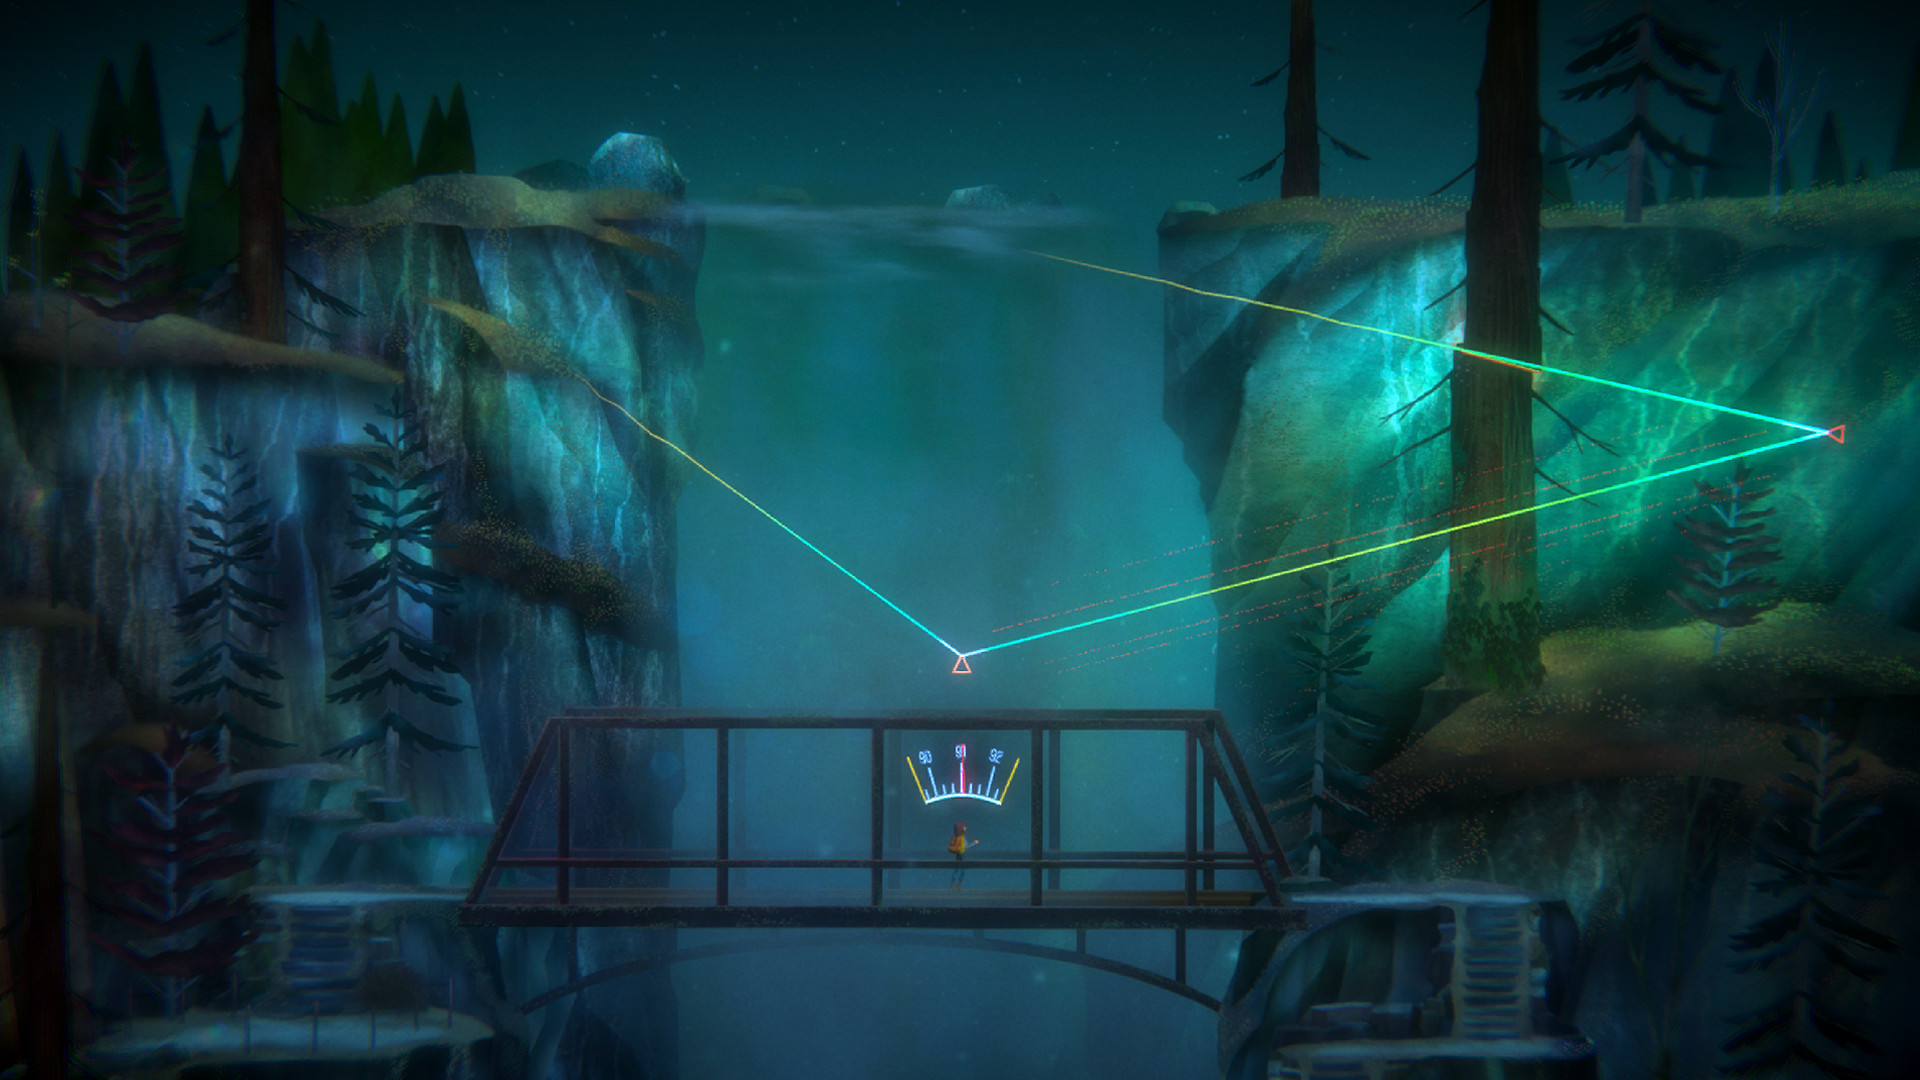 Oxenfree 2 Review: A Great New Game that's Free for Netflix Users